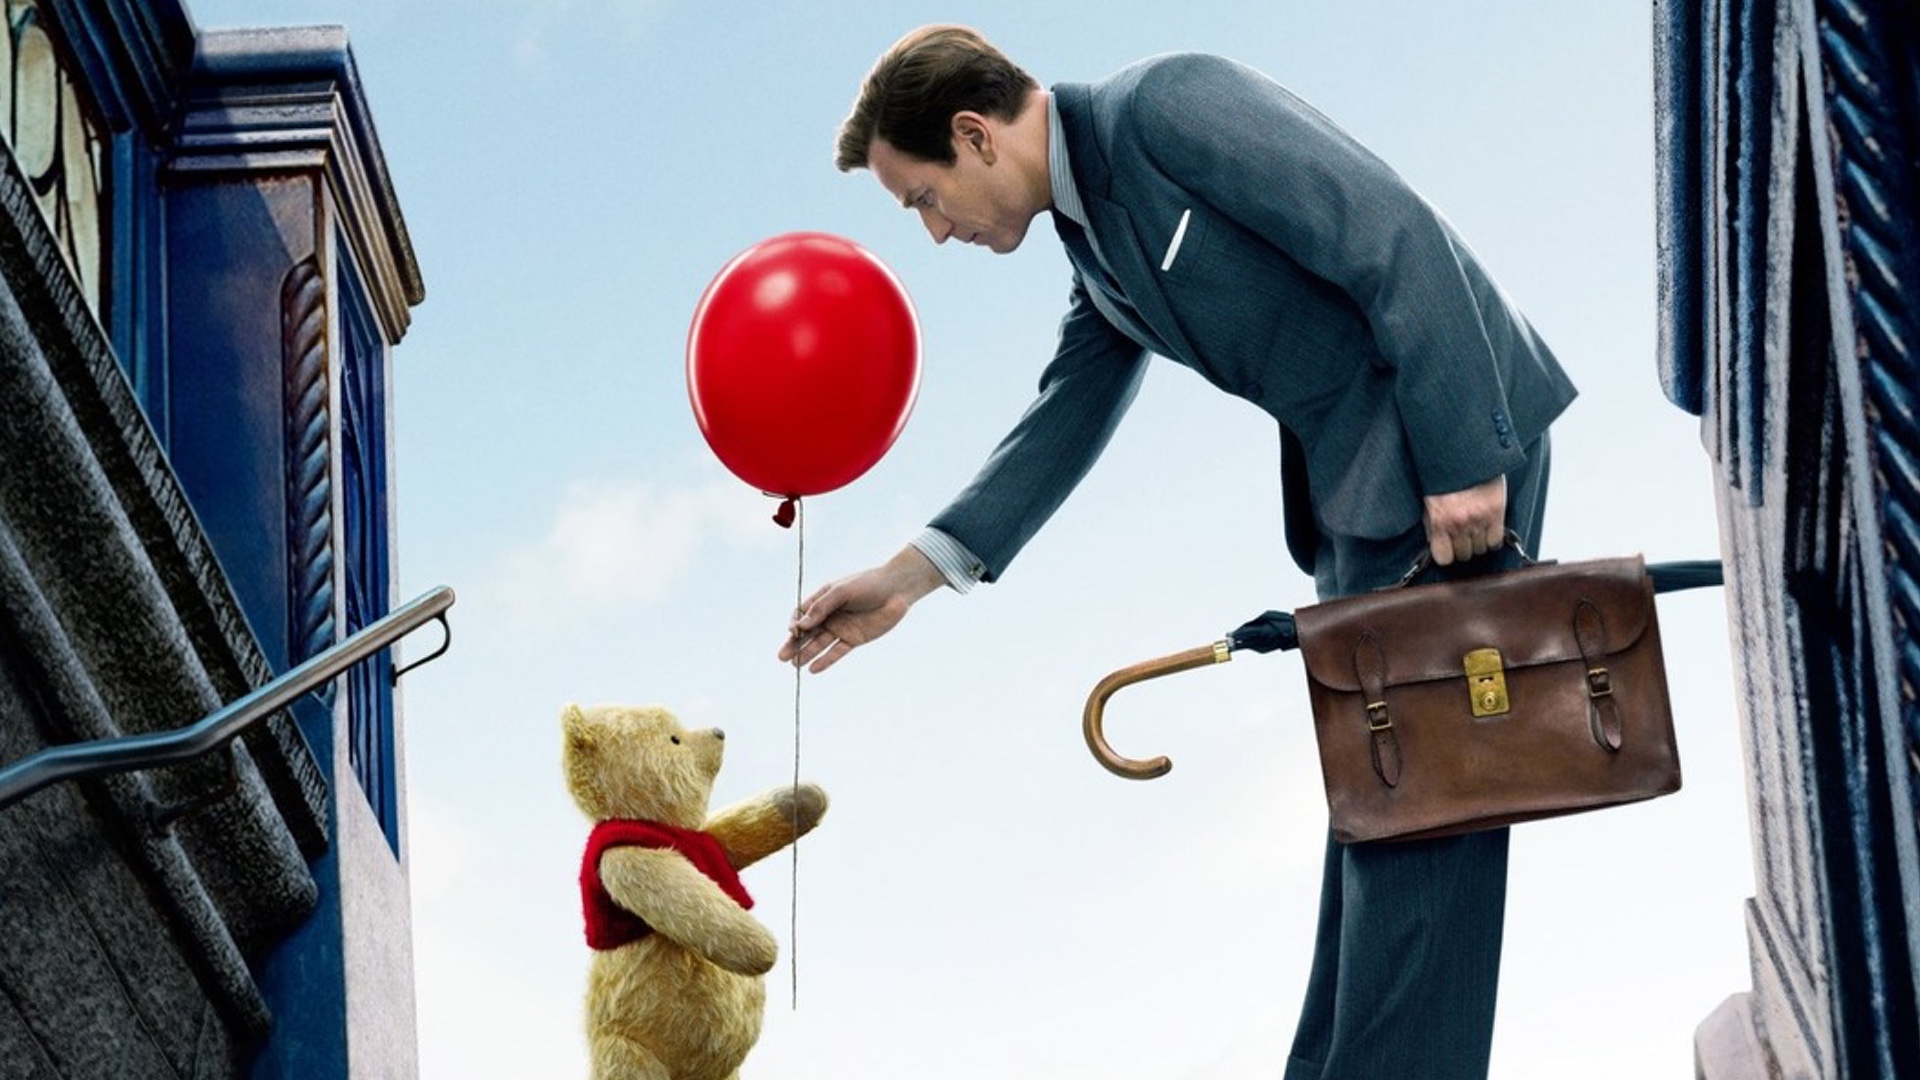 10 Work/Life Lessons From Winnie The Pooh in Disney’s CHRISTOPHER ROBIN Movie